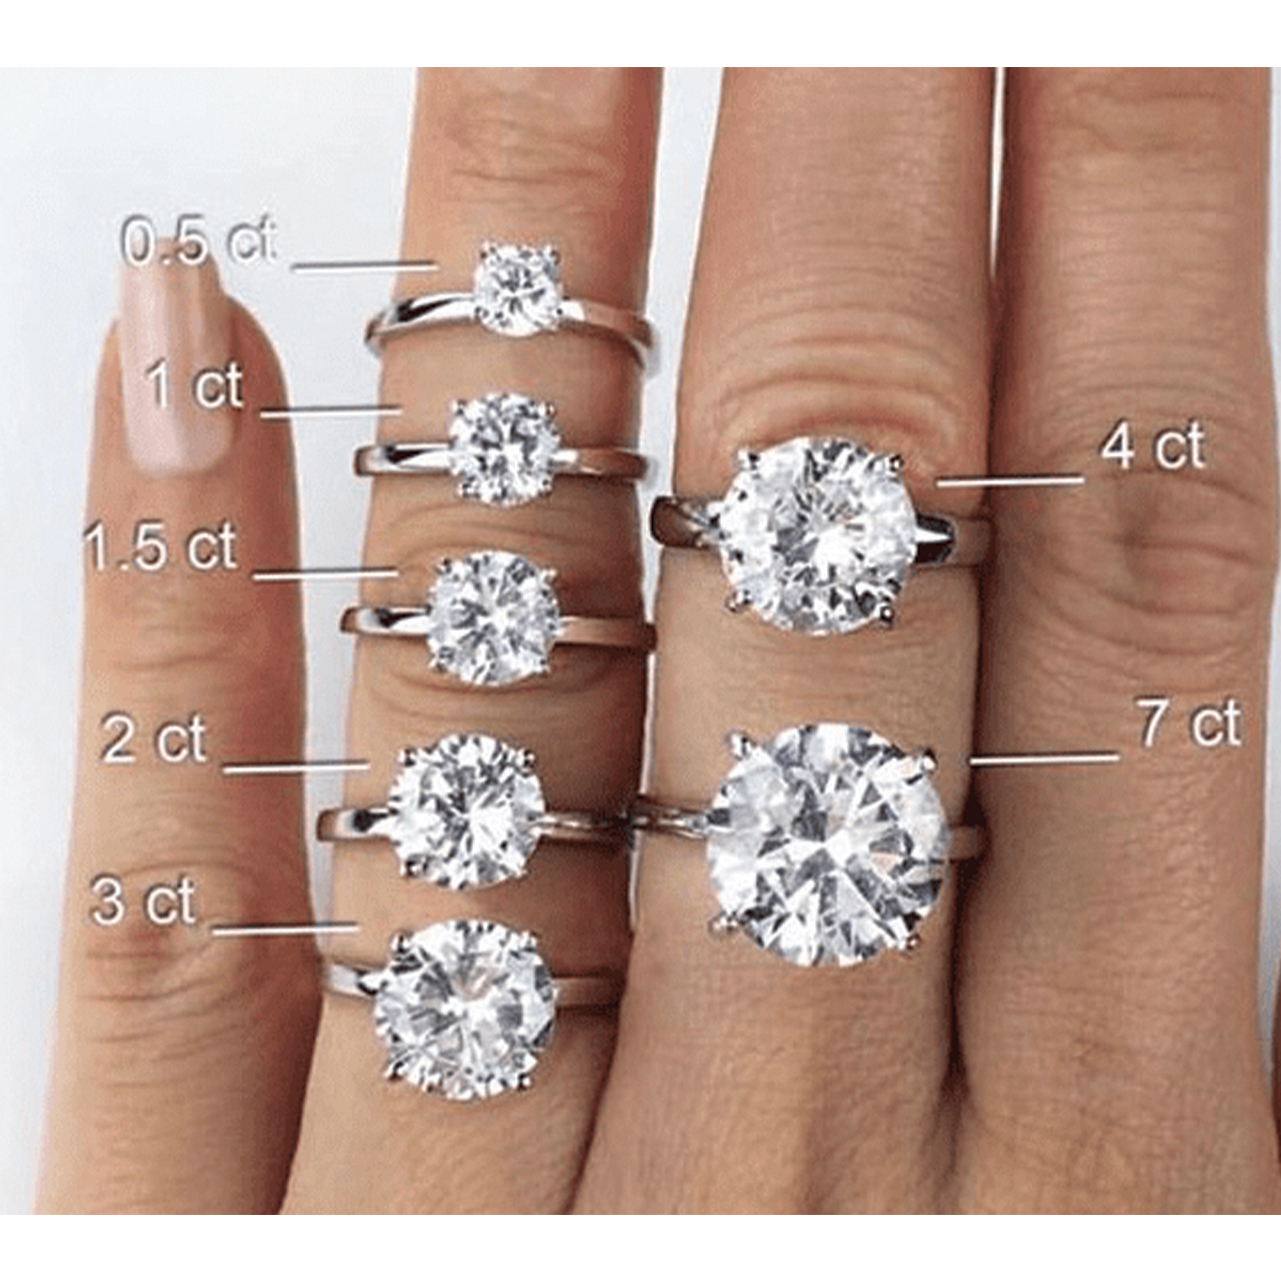 Centimeter Beheer Vervoer 6 Diamond Rings (By Actual Carat Size) At Levy Jewelers You Need To Try On!